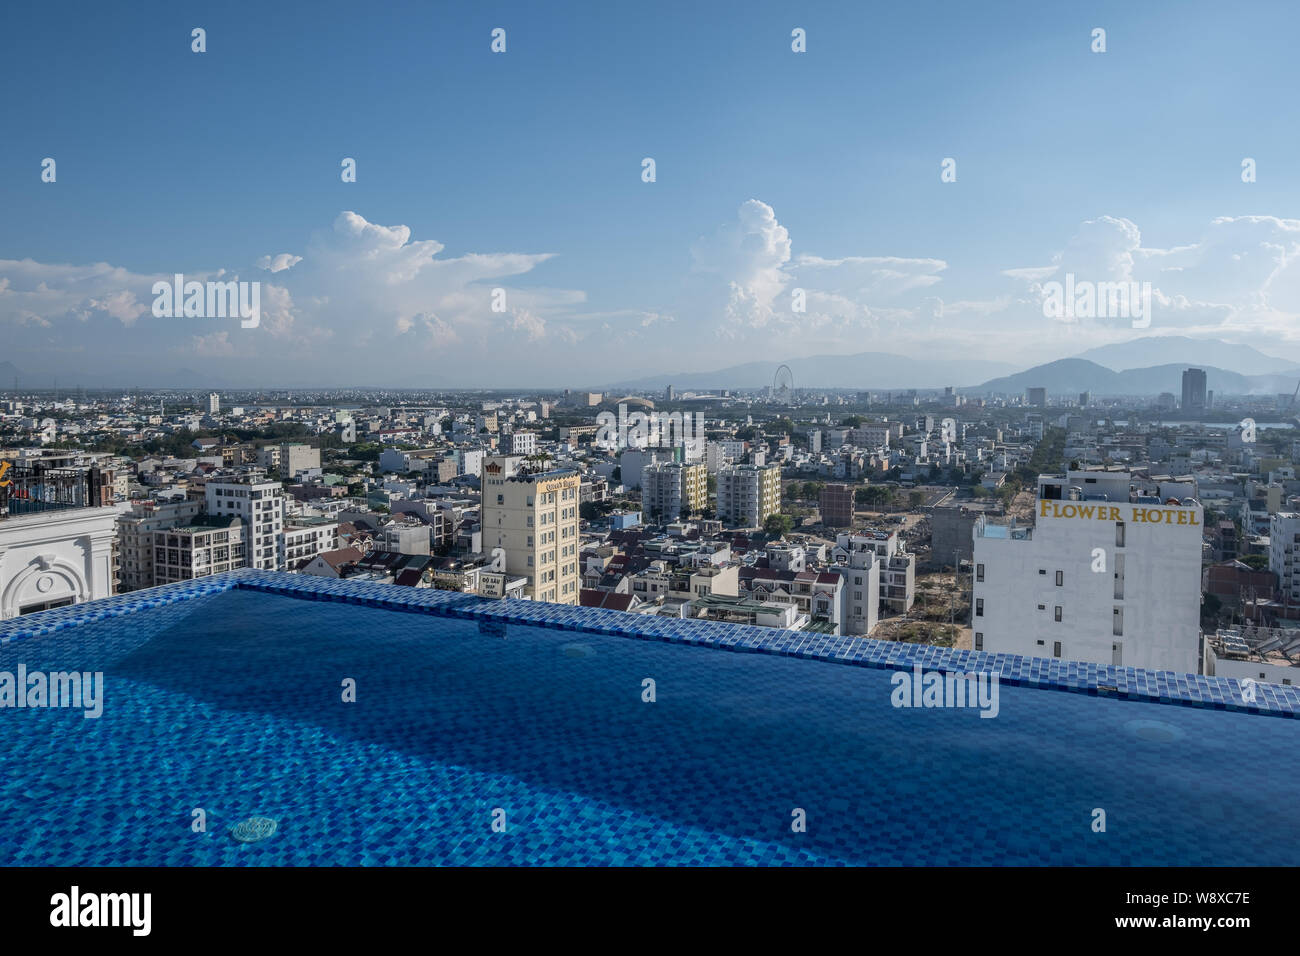 Overview of Danang city in central Vietnam Stock Photo